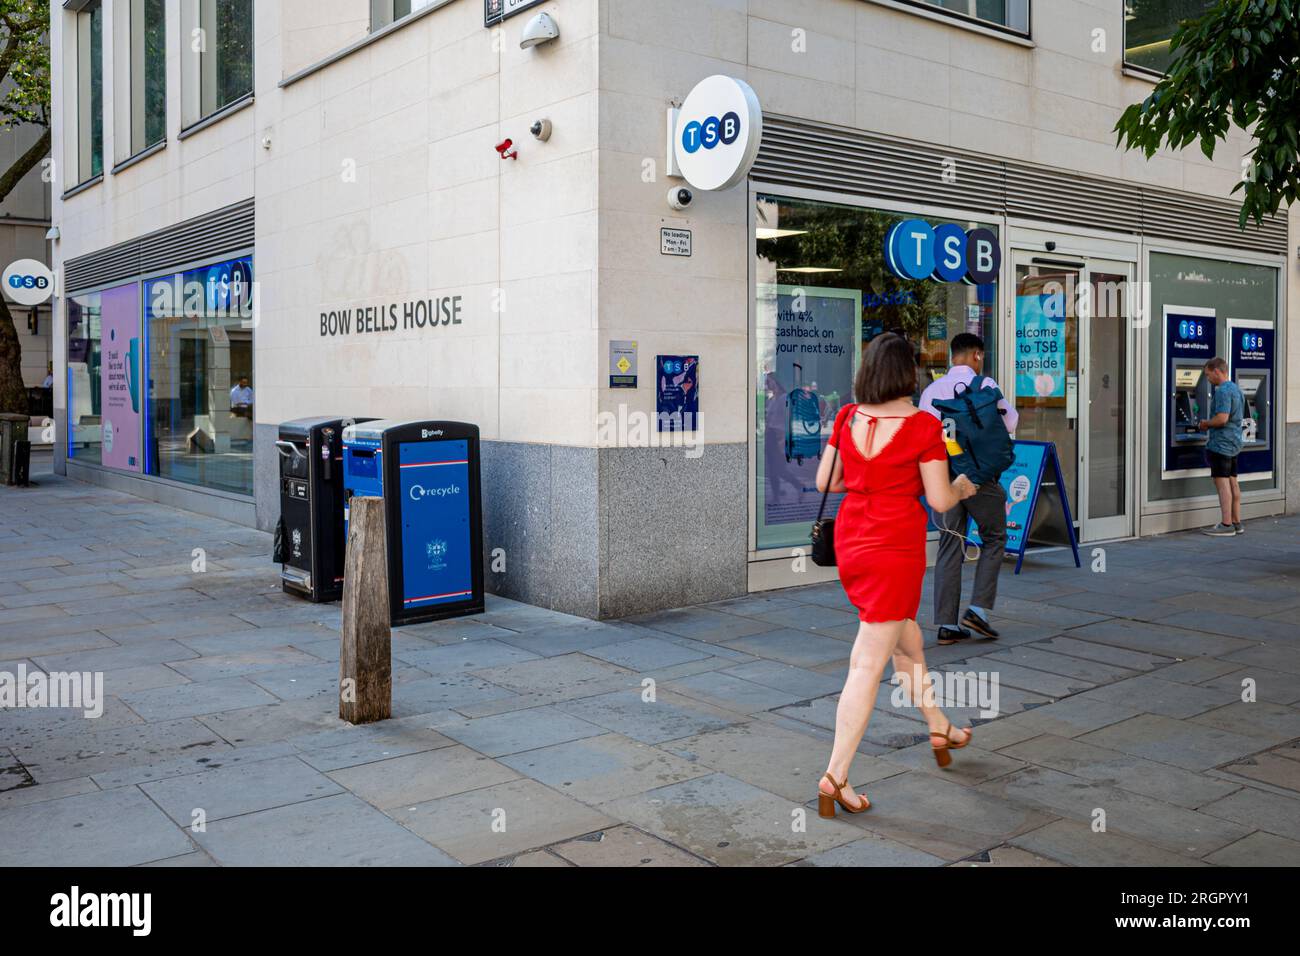 TSB Branch London - TSB flagship branch on London's Cheapside in the City of London Financial District. TSB Bow Bells House London. Stock Photo